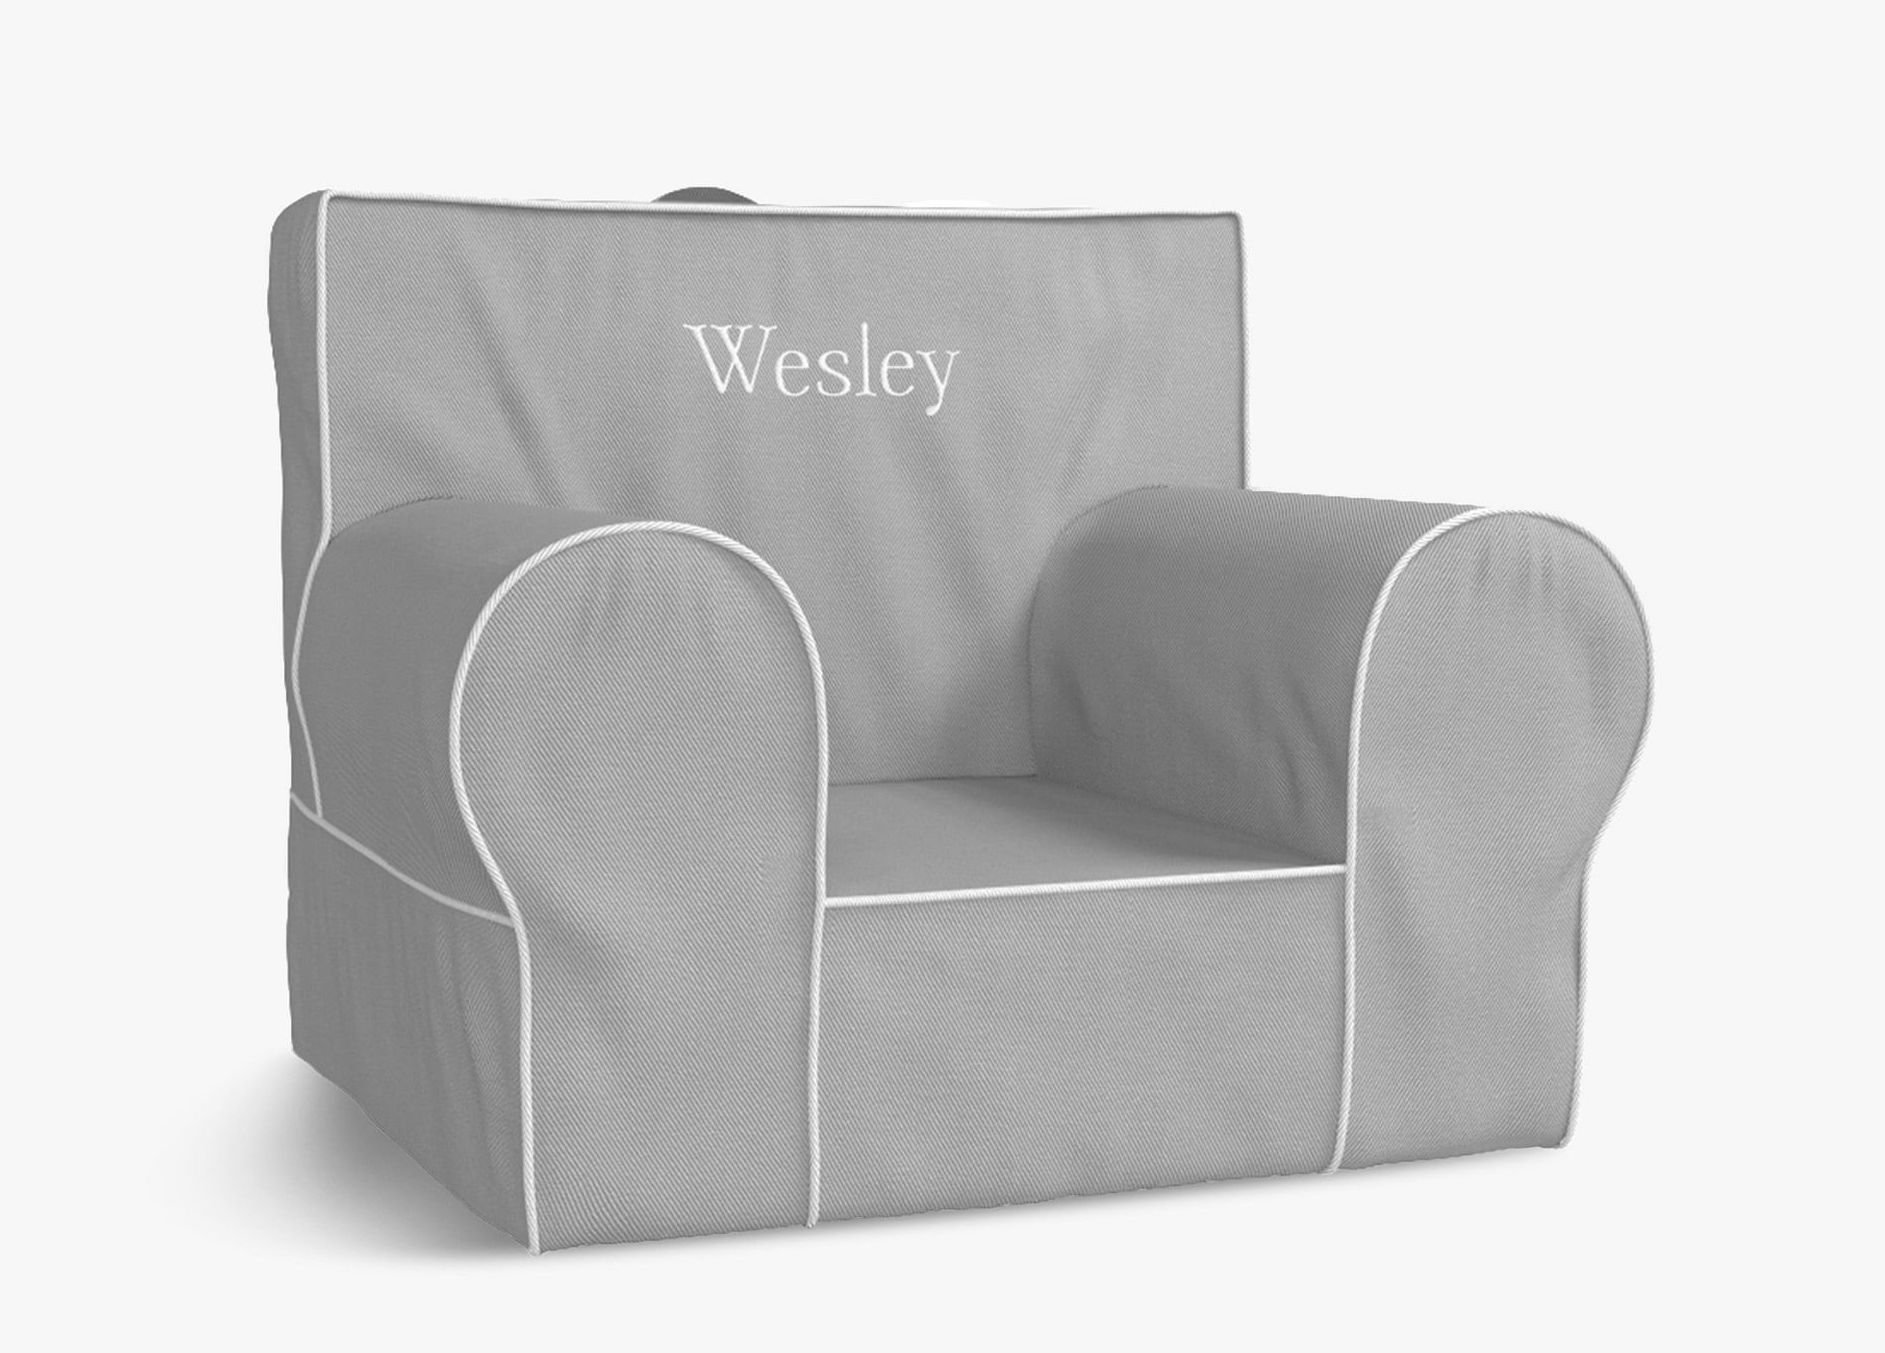 Personalized grey blush armchair for kids from Pottery Barn Kids